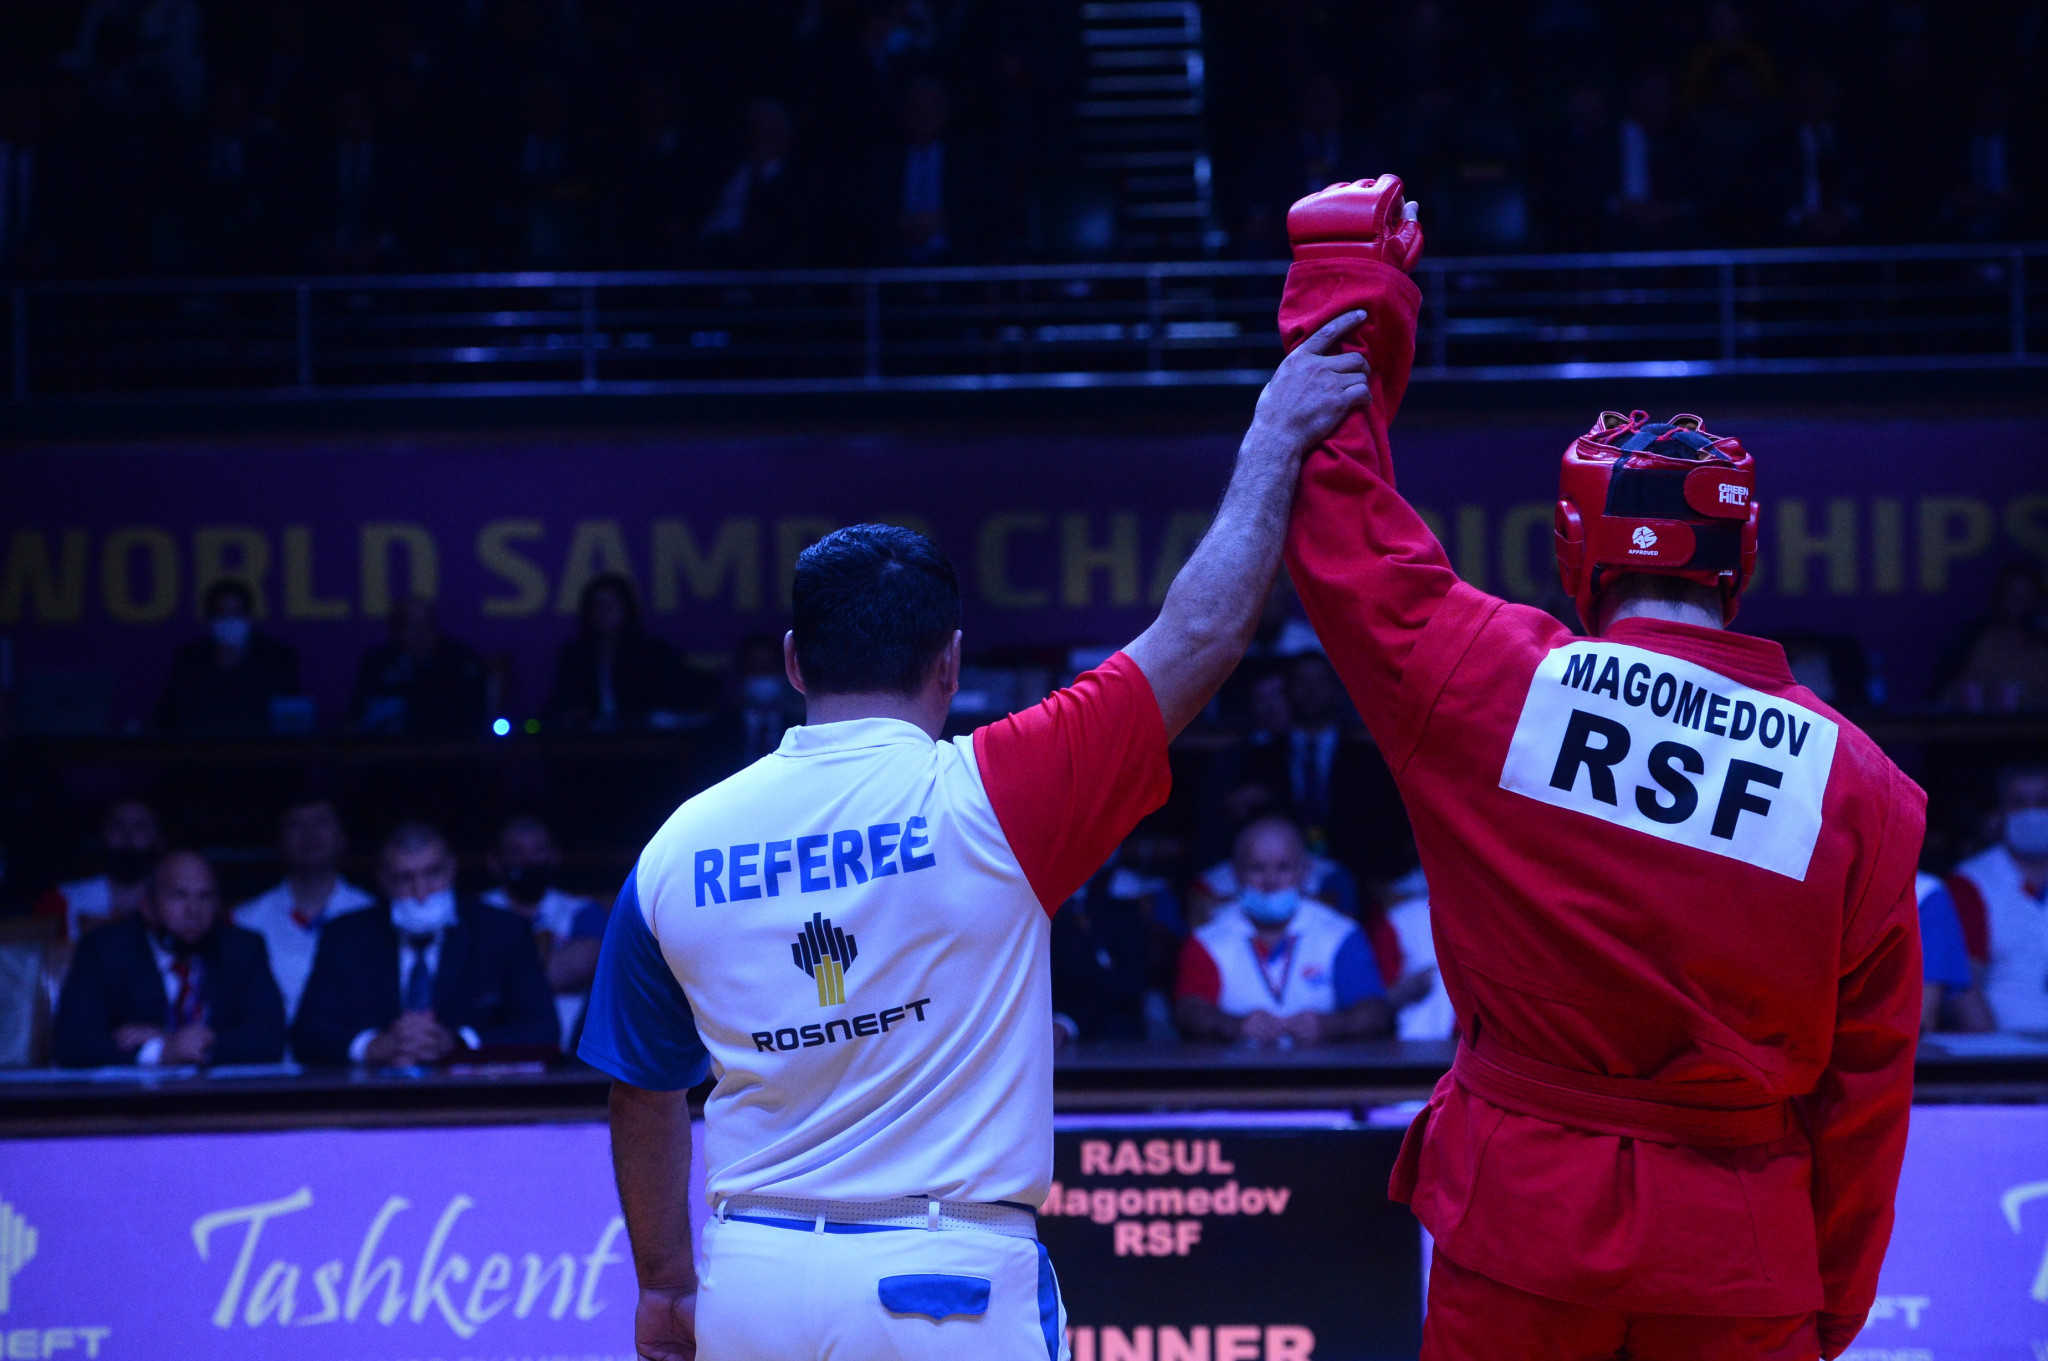 Magomedov Rasul has his arm raised in victory after his opponent Raikhan Madi failed to show up for the final  ©FIAS